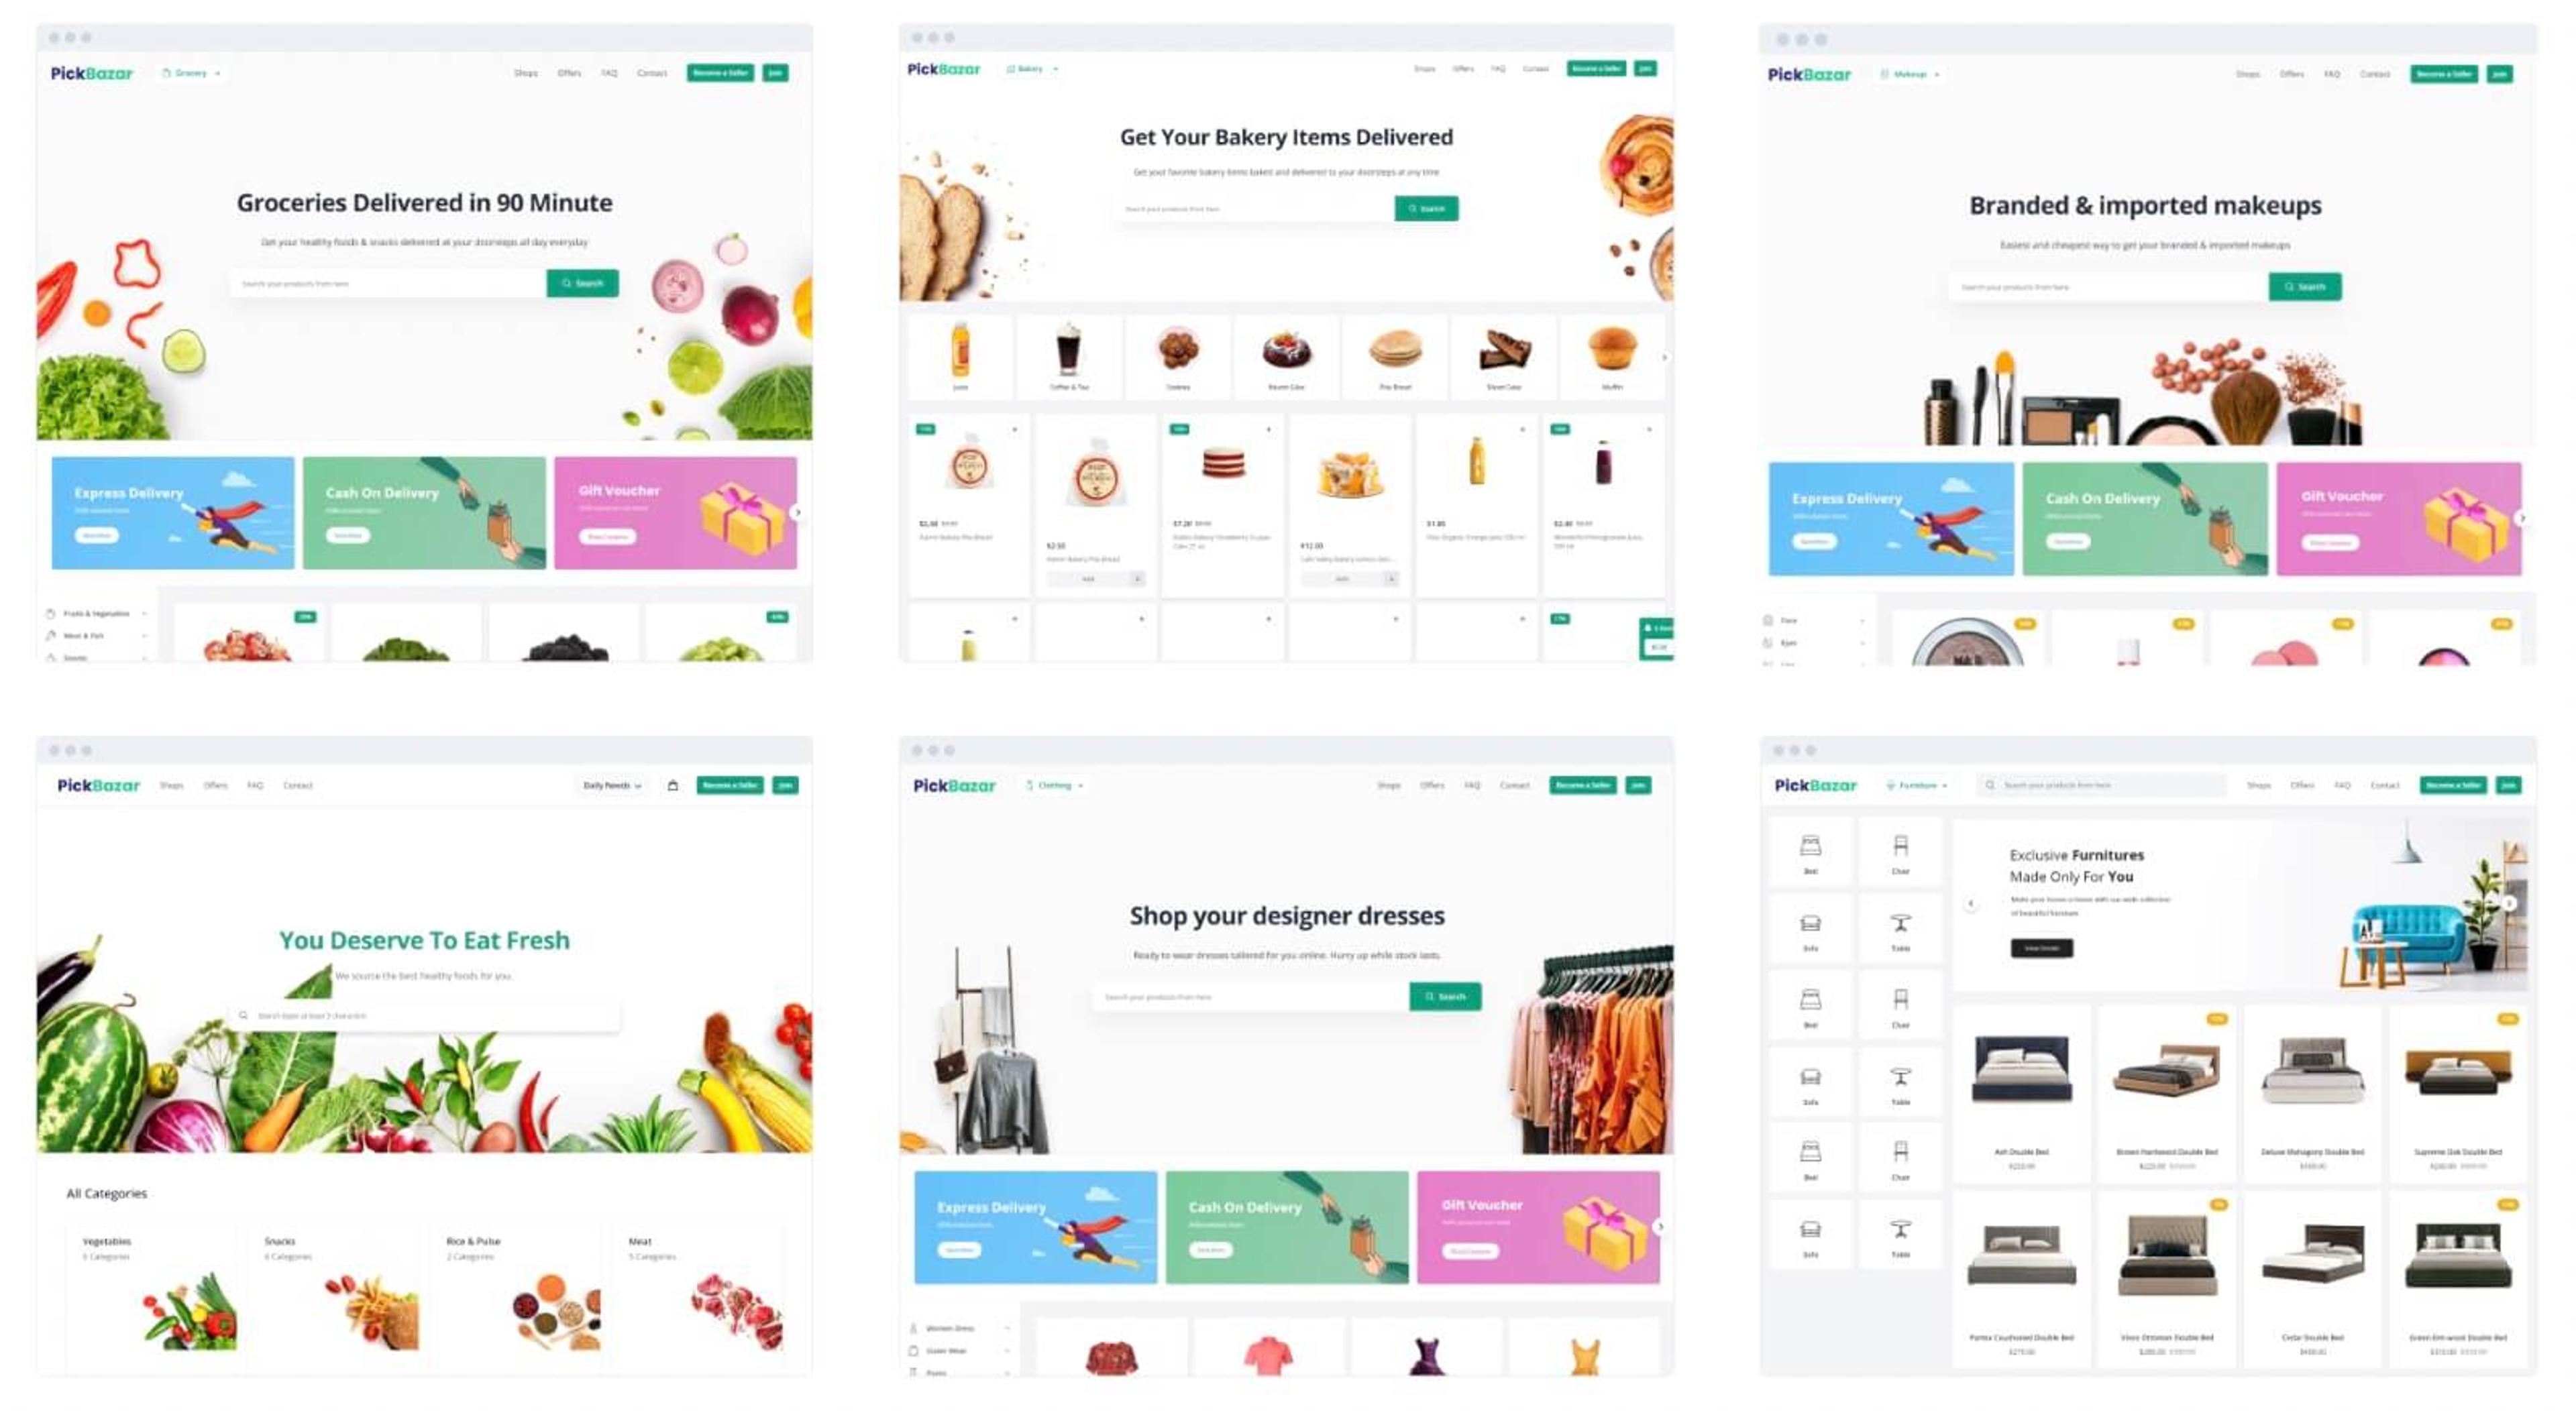 Samples of some of the available ecommerce store templates, such as groceries, furniture, clothing, and more.